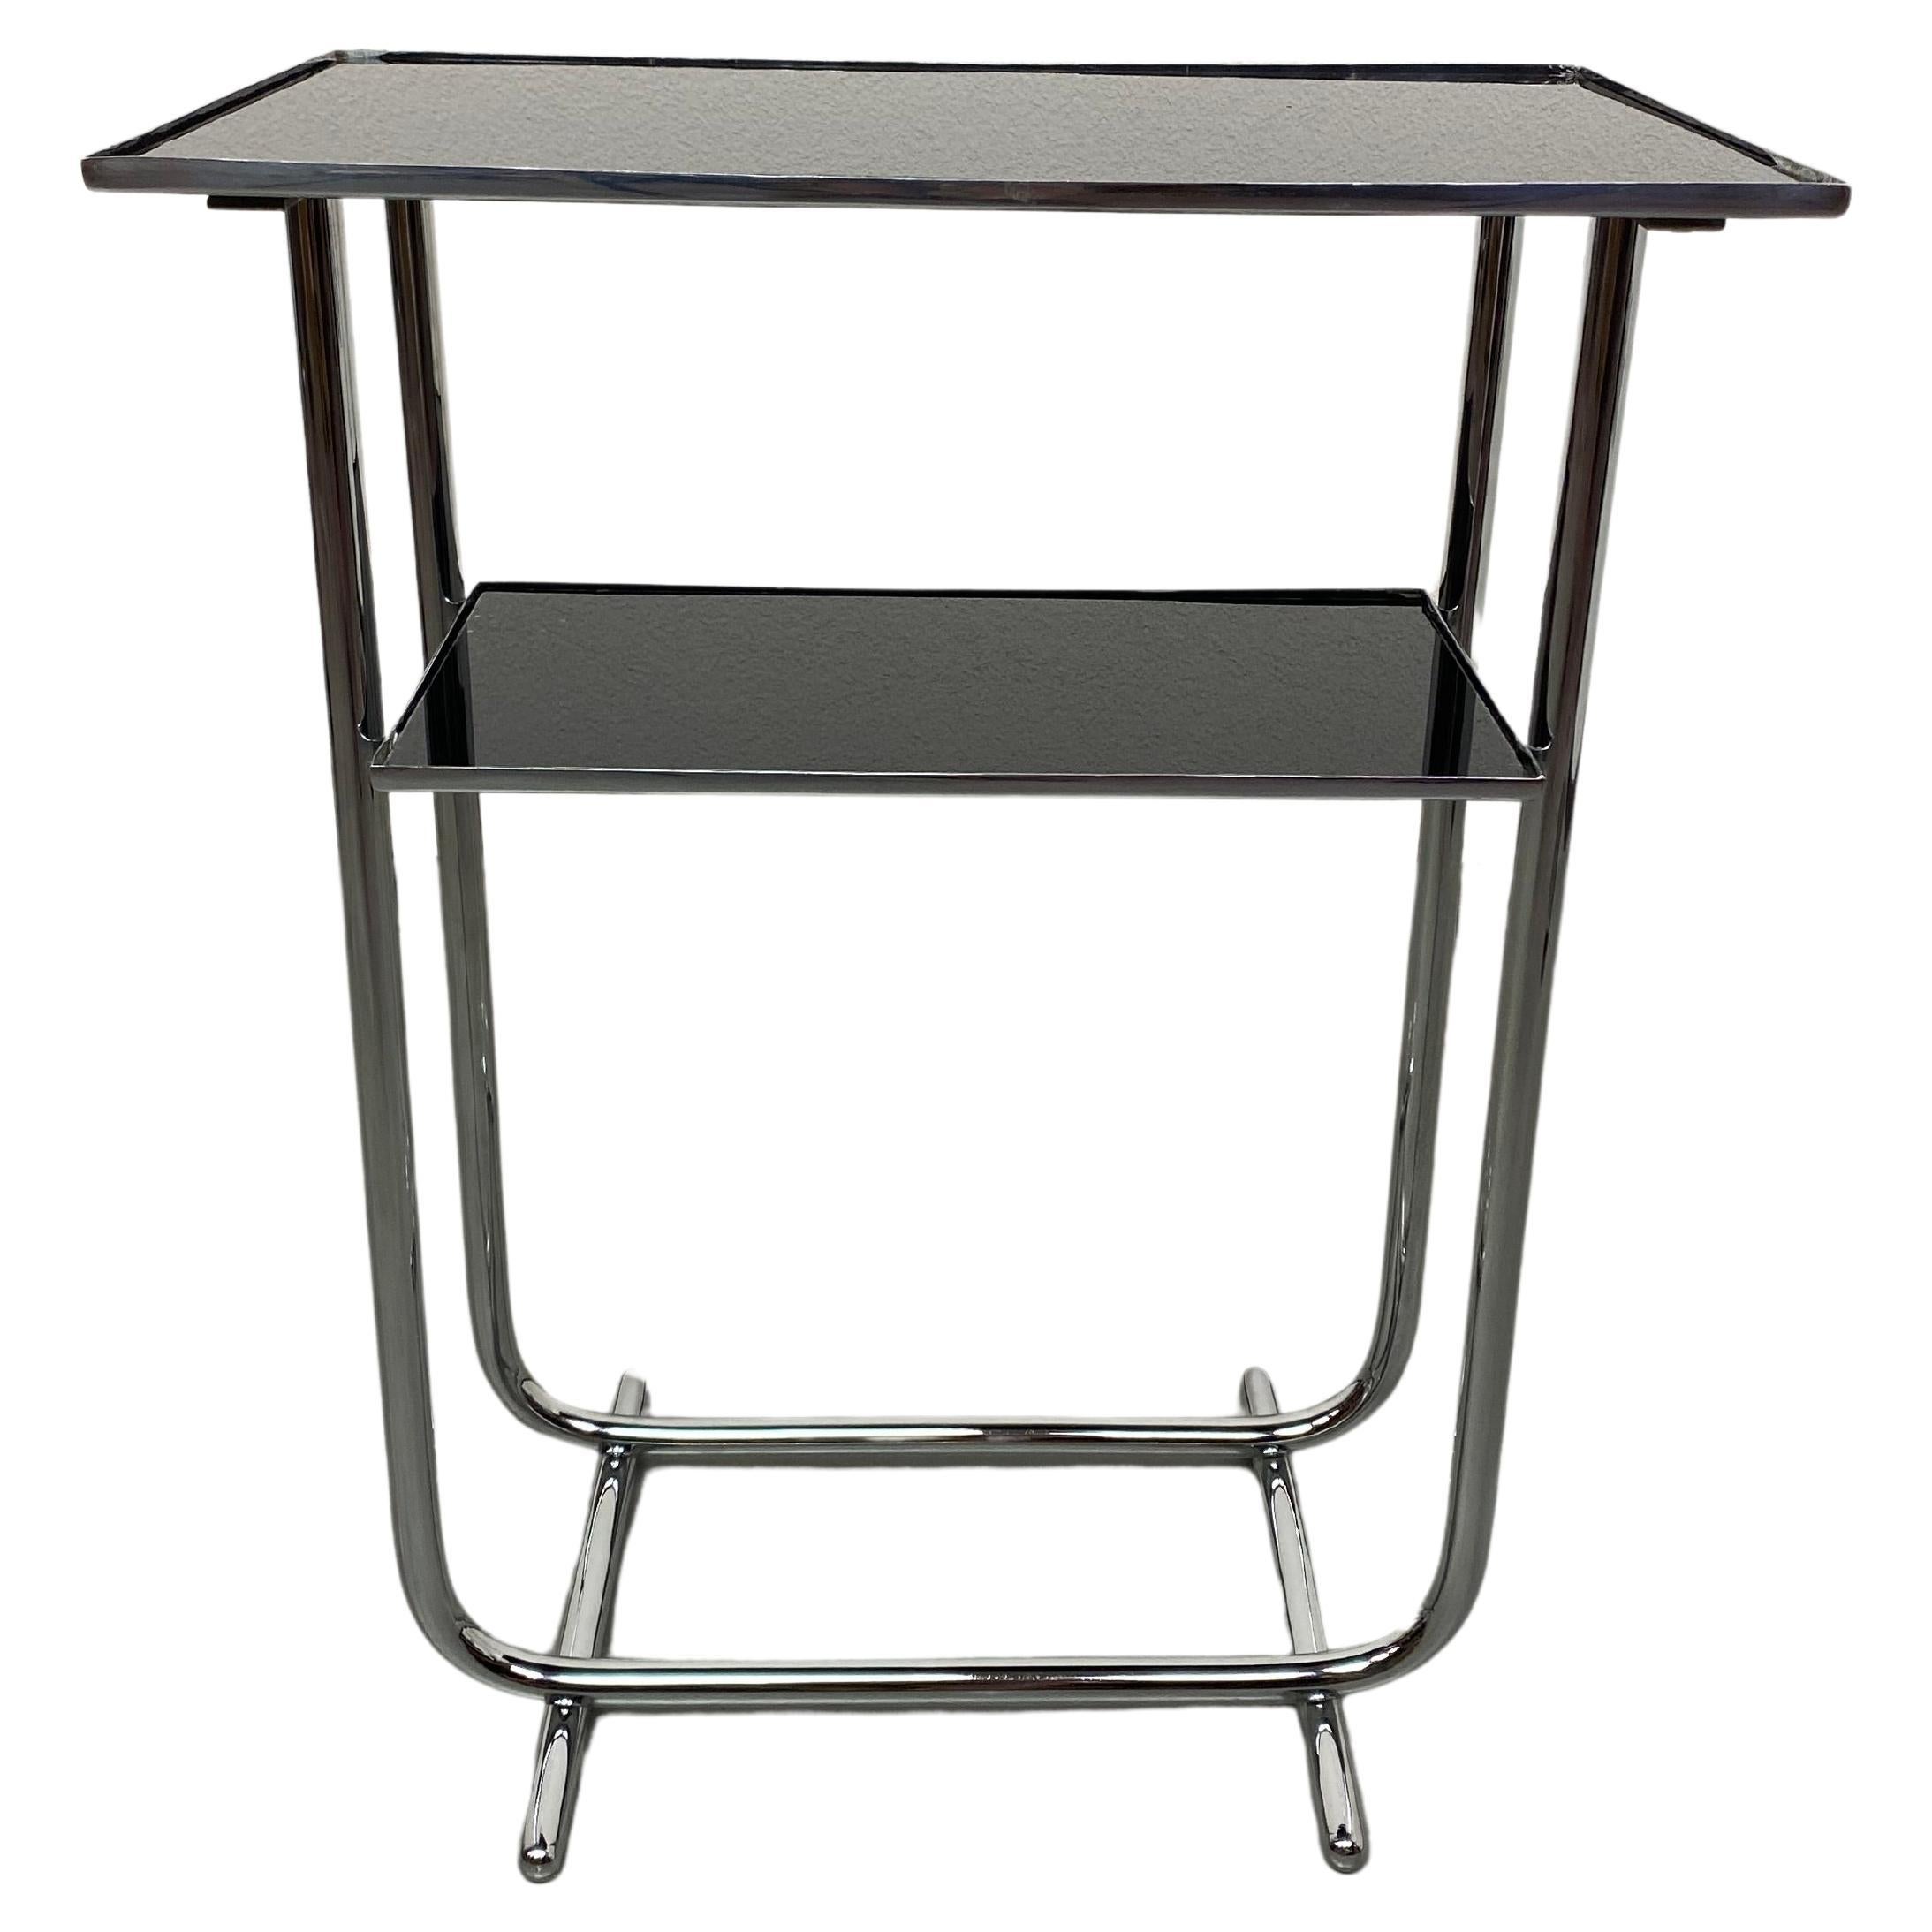 Bauhaus side table with black glass top